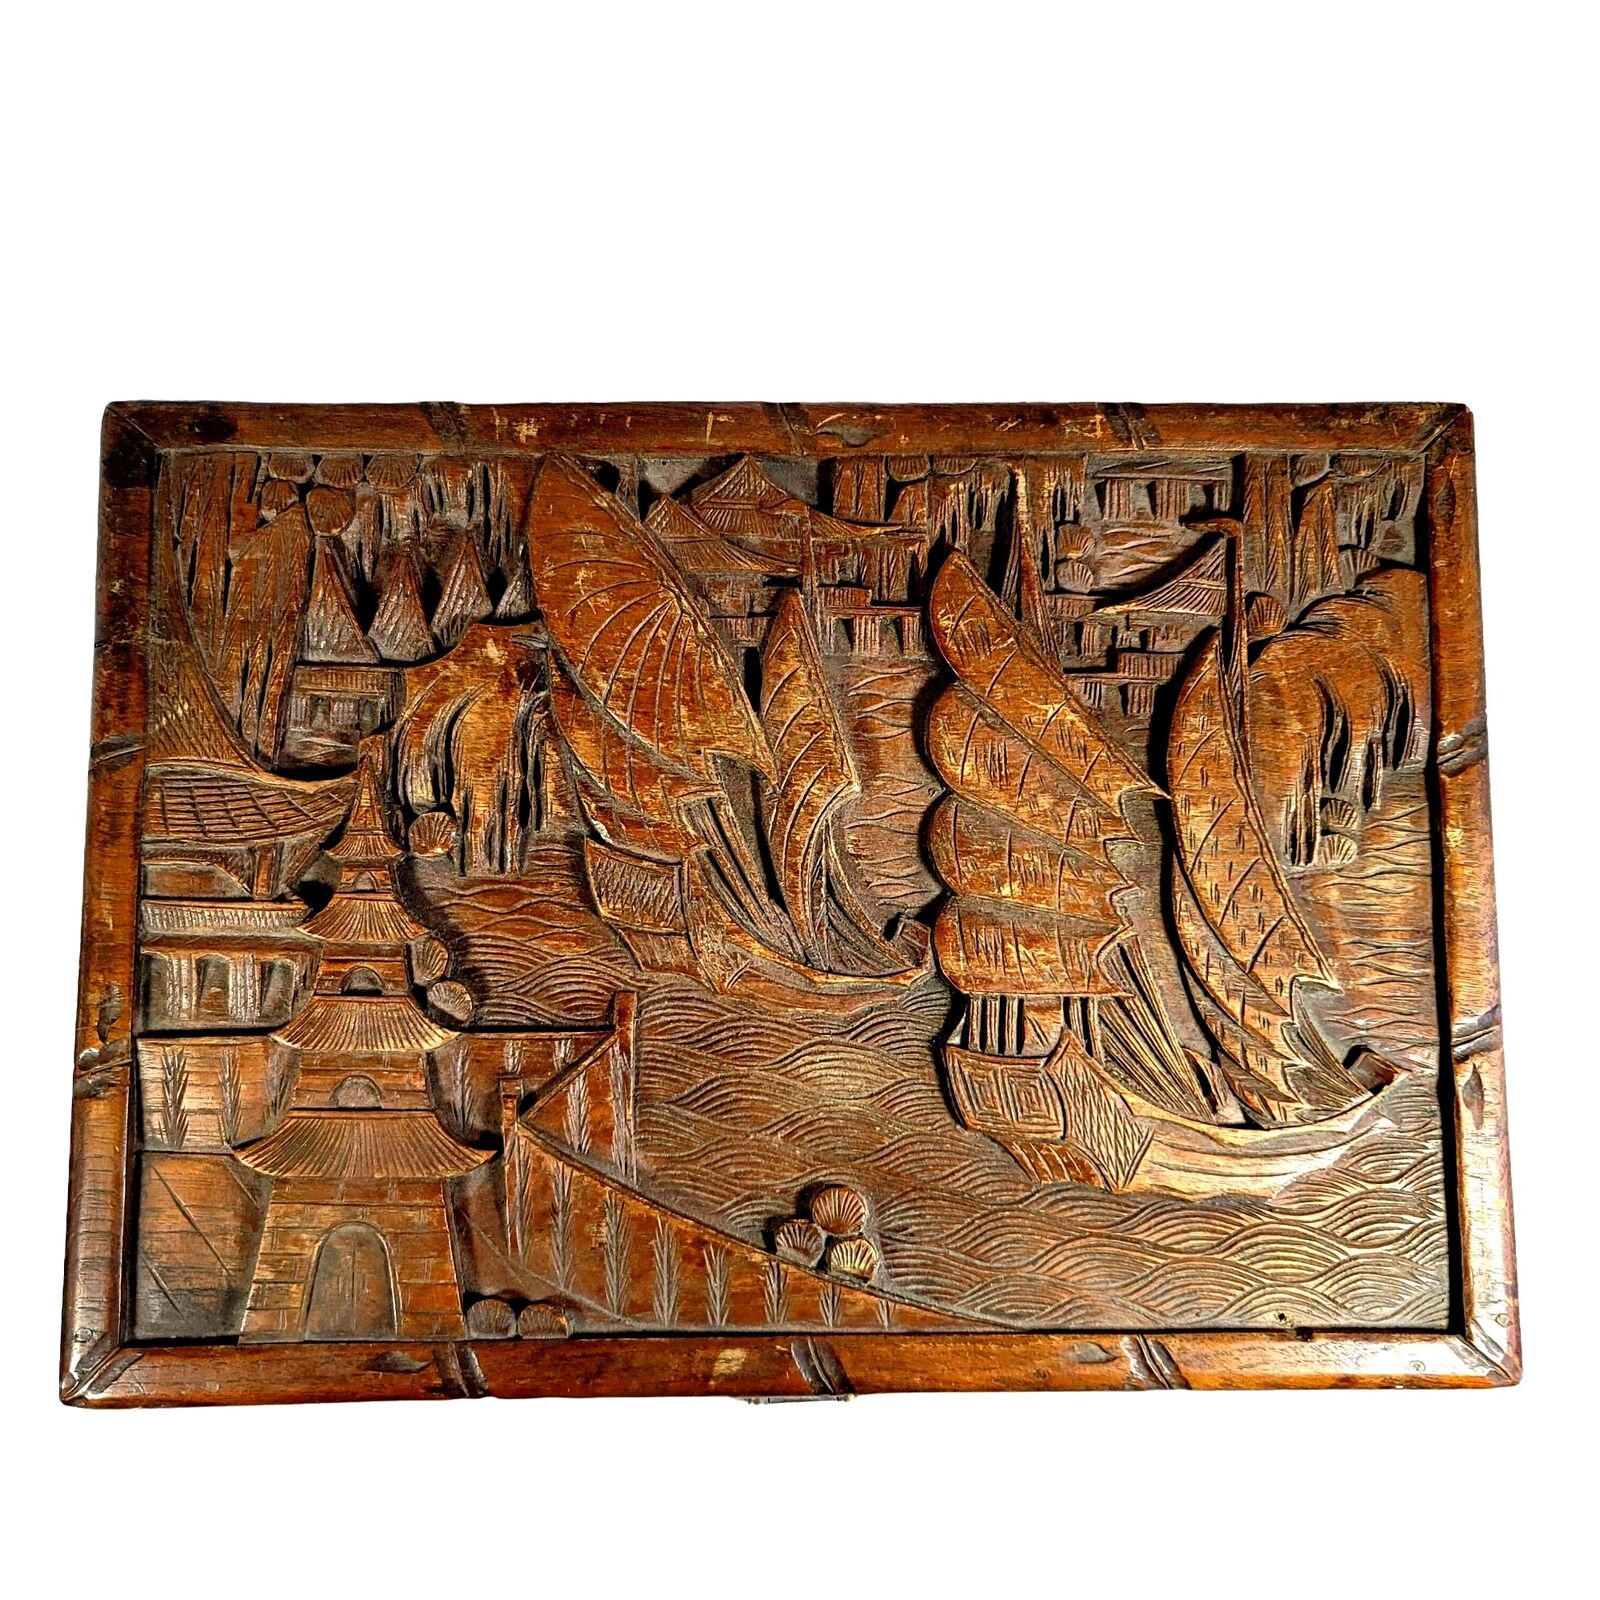 Antique Chinese Hand Carved Wooden Chest Box Nautical Scene + Boats + Temples